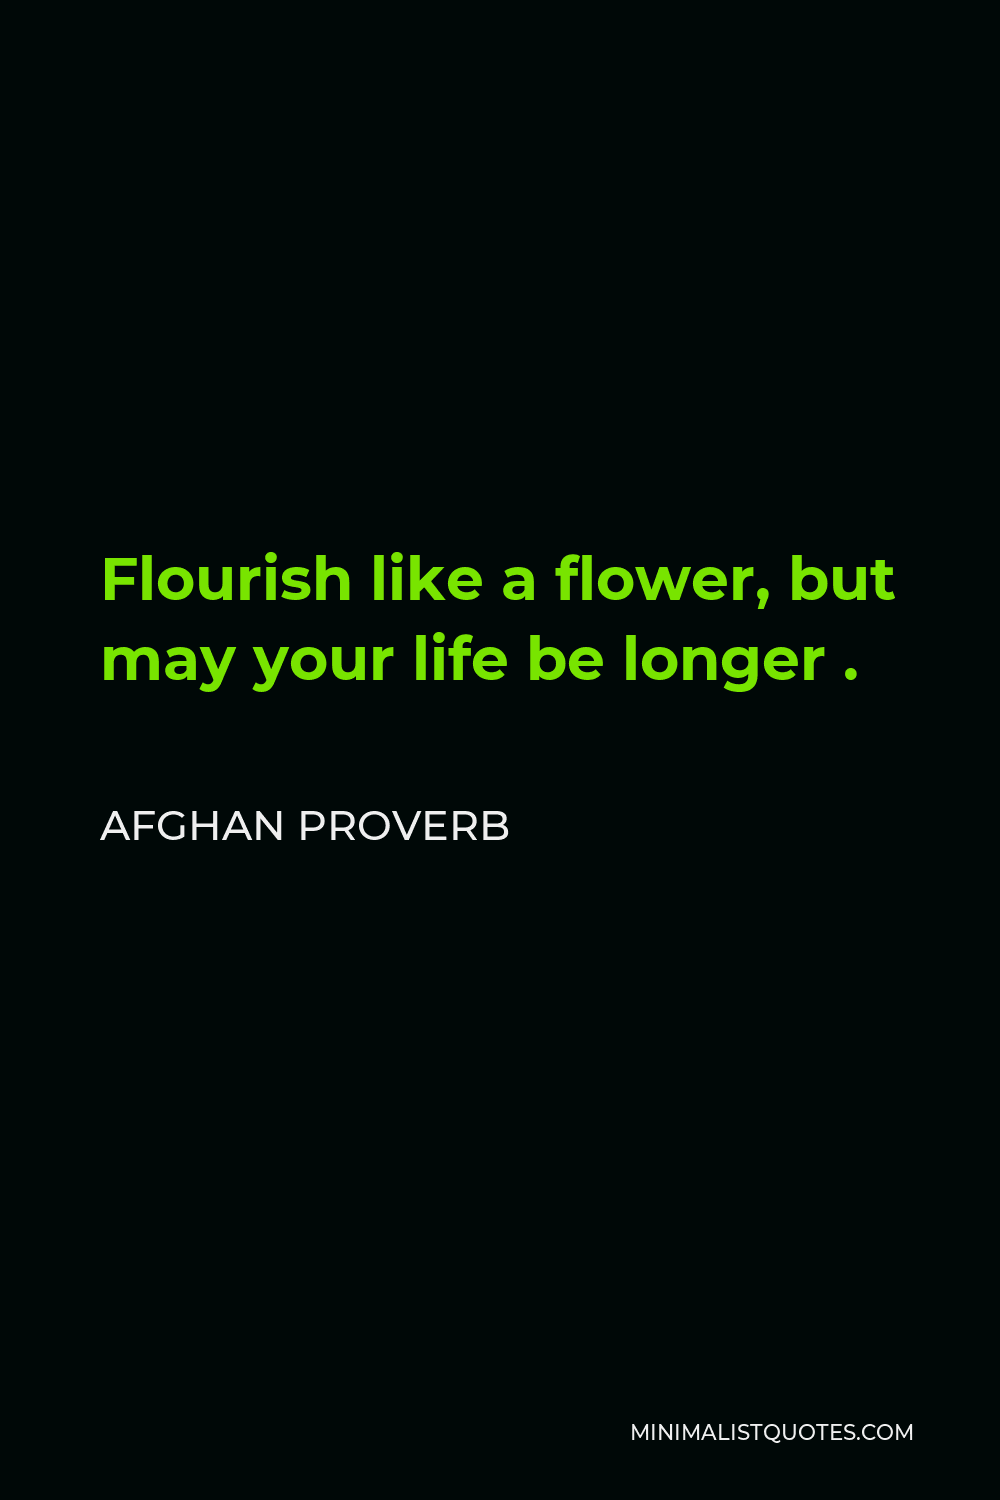 Afghan Proverb Quote - Flourish like a flower, but may your life be longer .